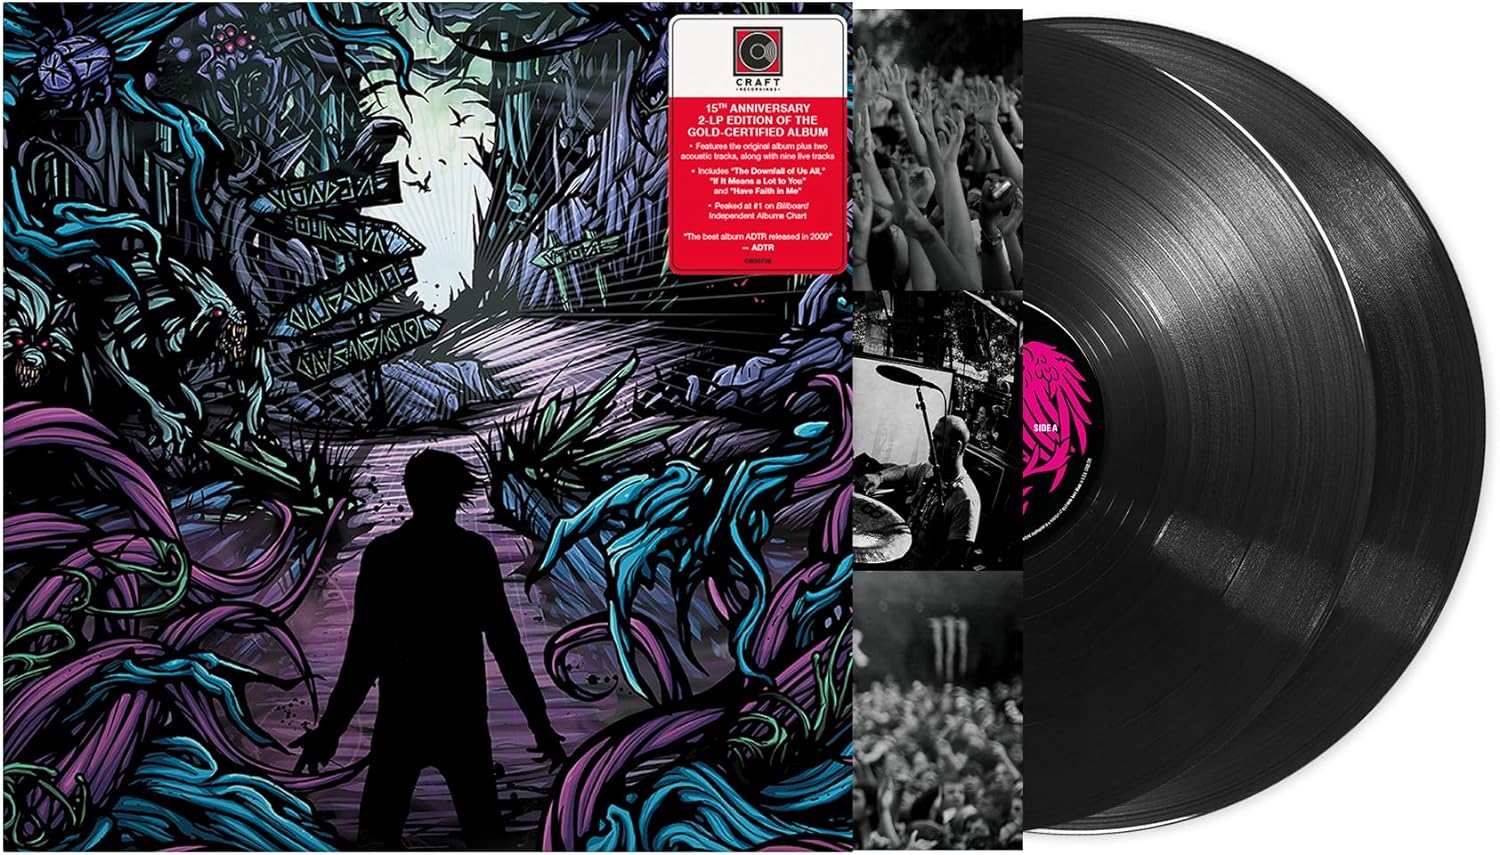 A DAY TO REMEMBER - Homesick (15th Anniversary Edition) - 2LP - Deluxe Gatefold Vinyl [JUL 19]